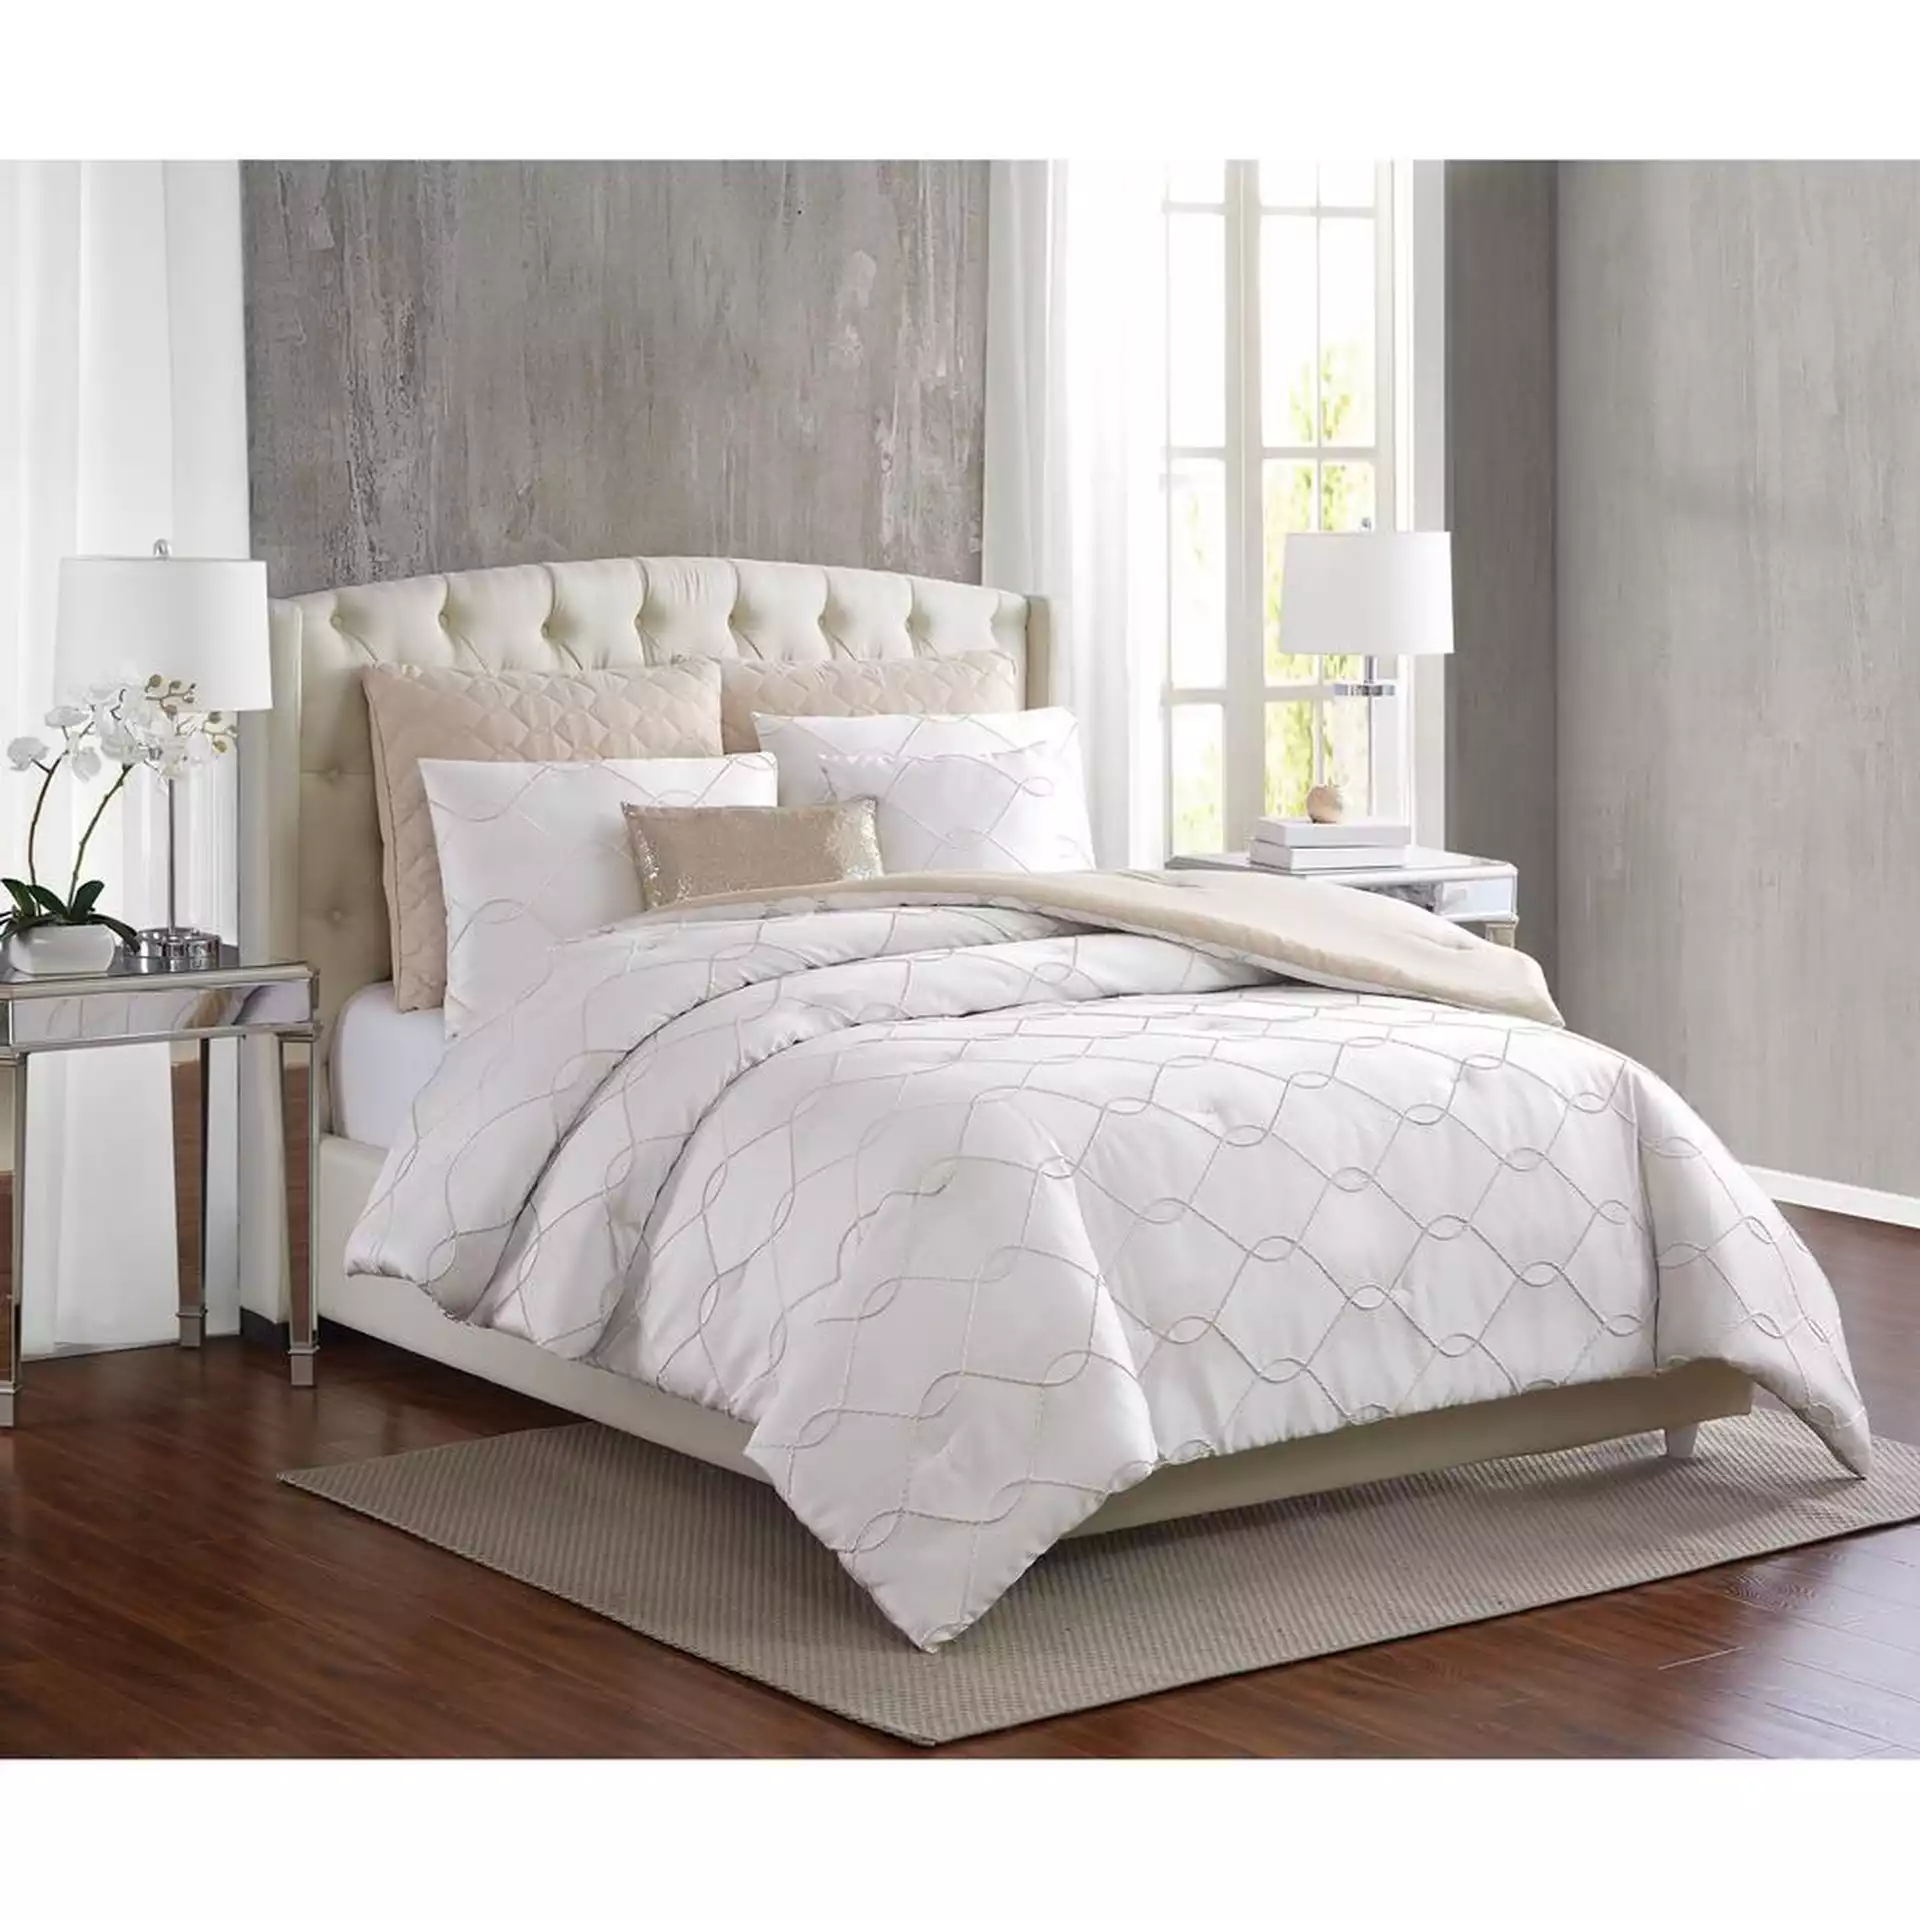 FIFTH AVENUE LUX Serafina 7-Piece Queen Comforter Set, Silver and Gold